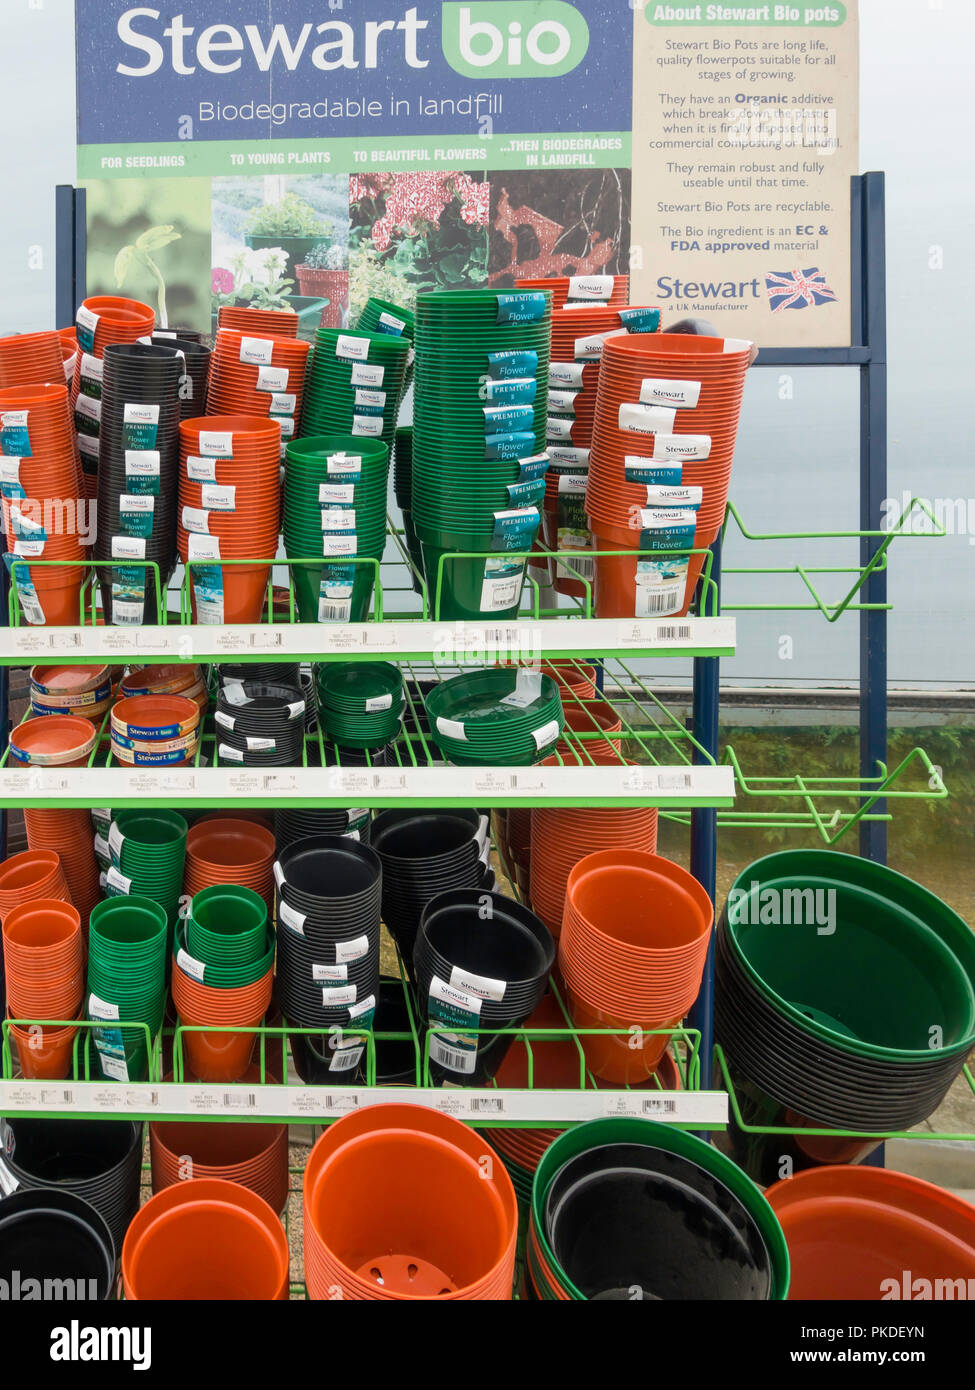 A garden centre display  of eco friendly Stewart plant pots bio degradable in landfill after use Stock Photo